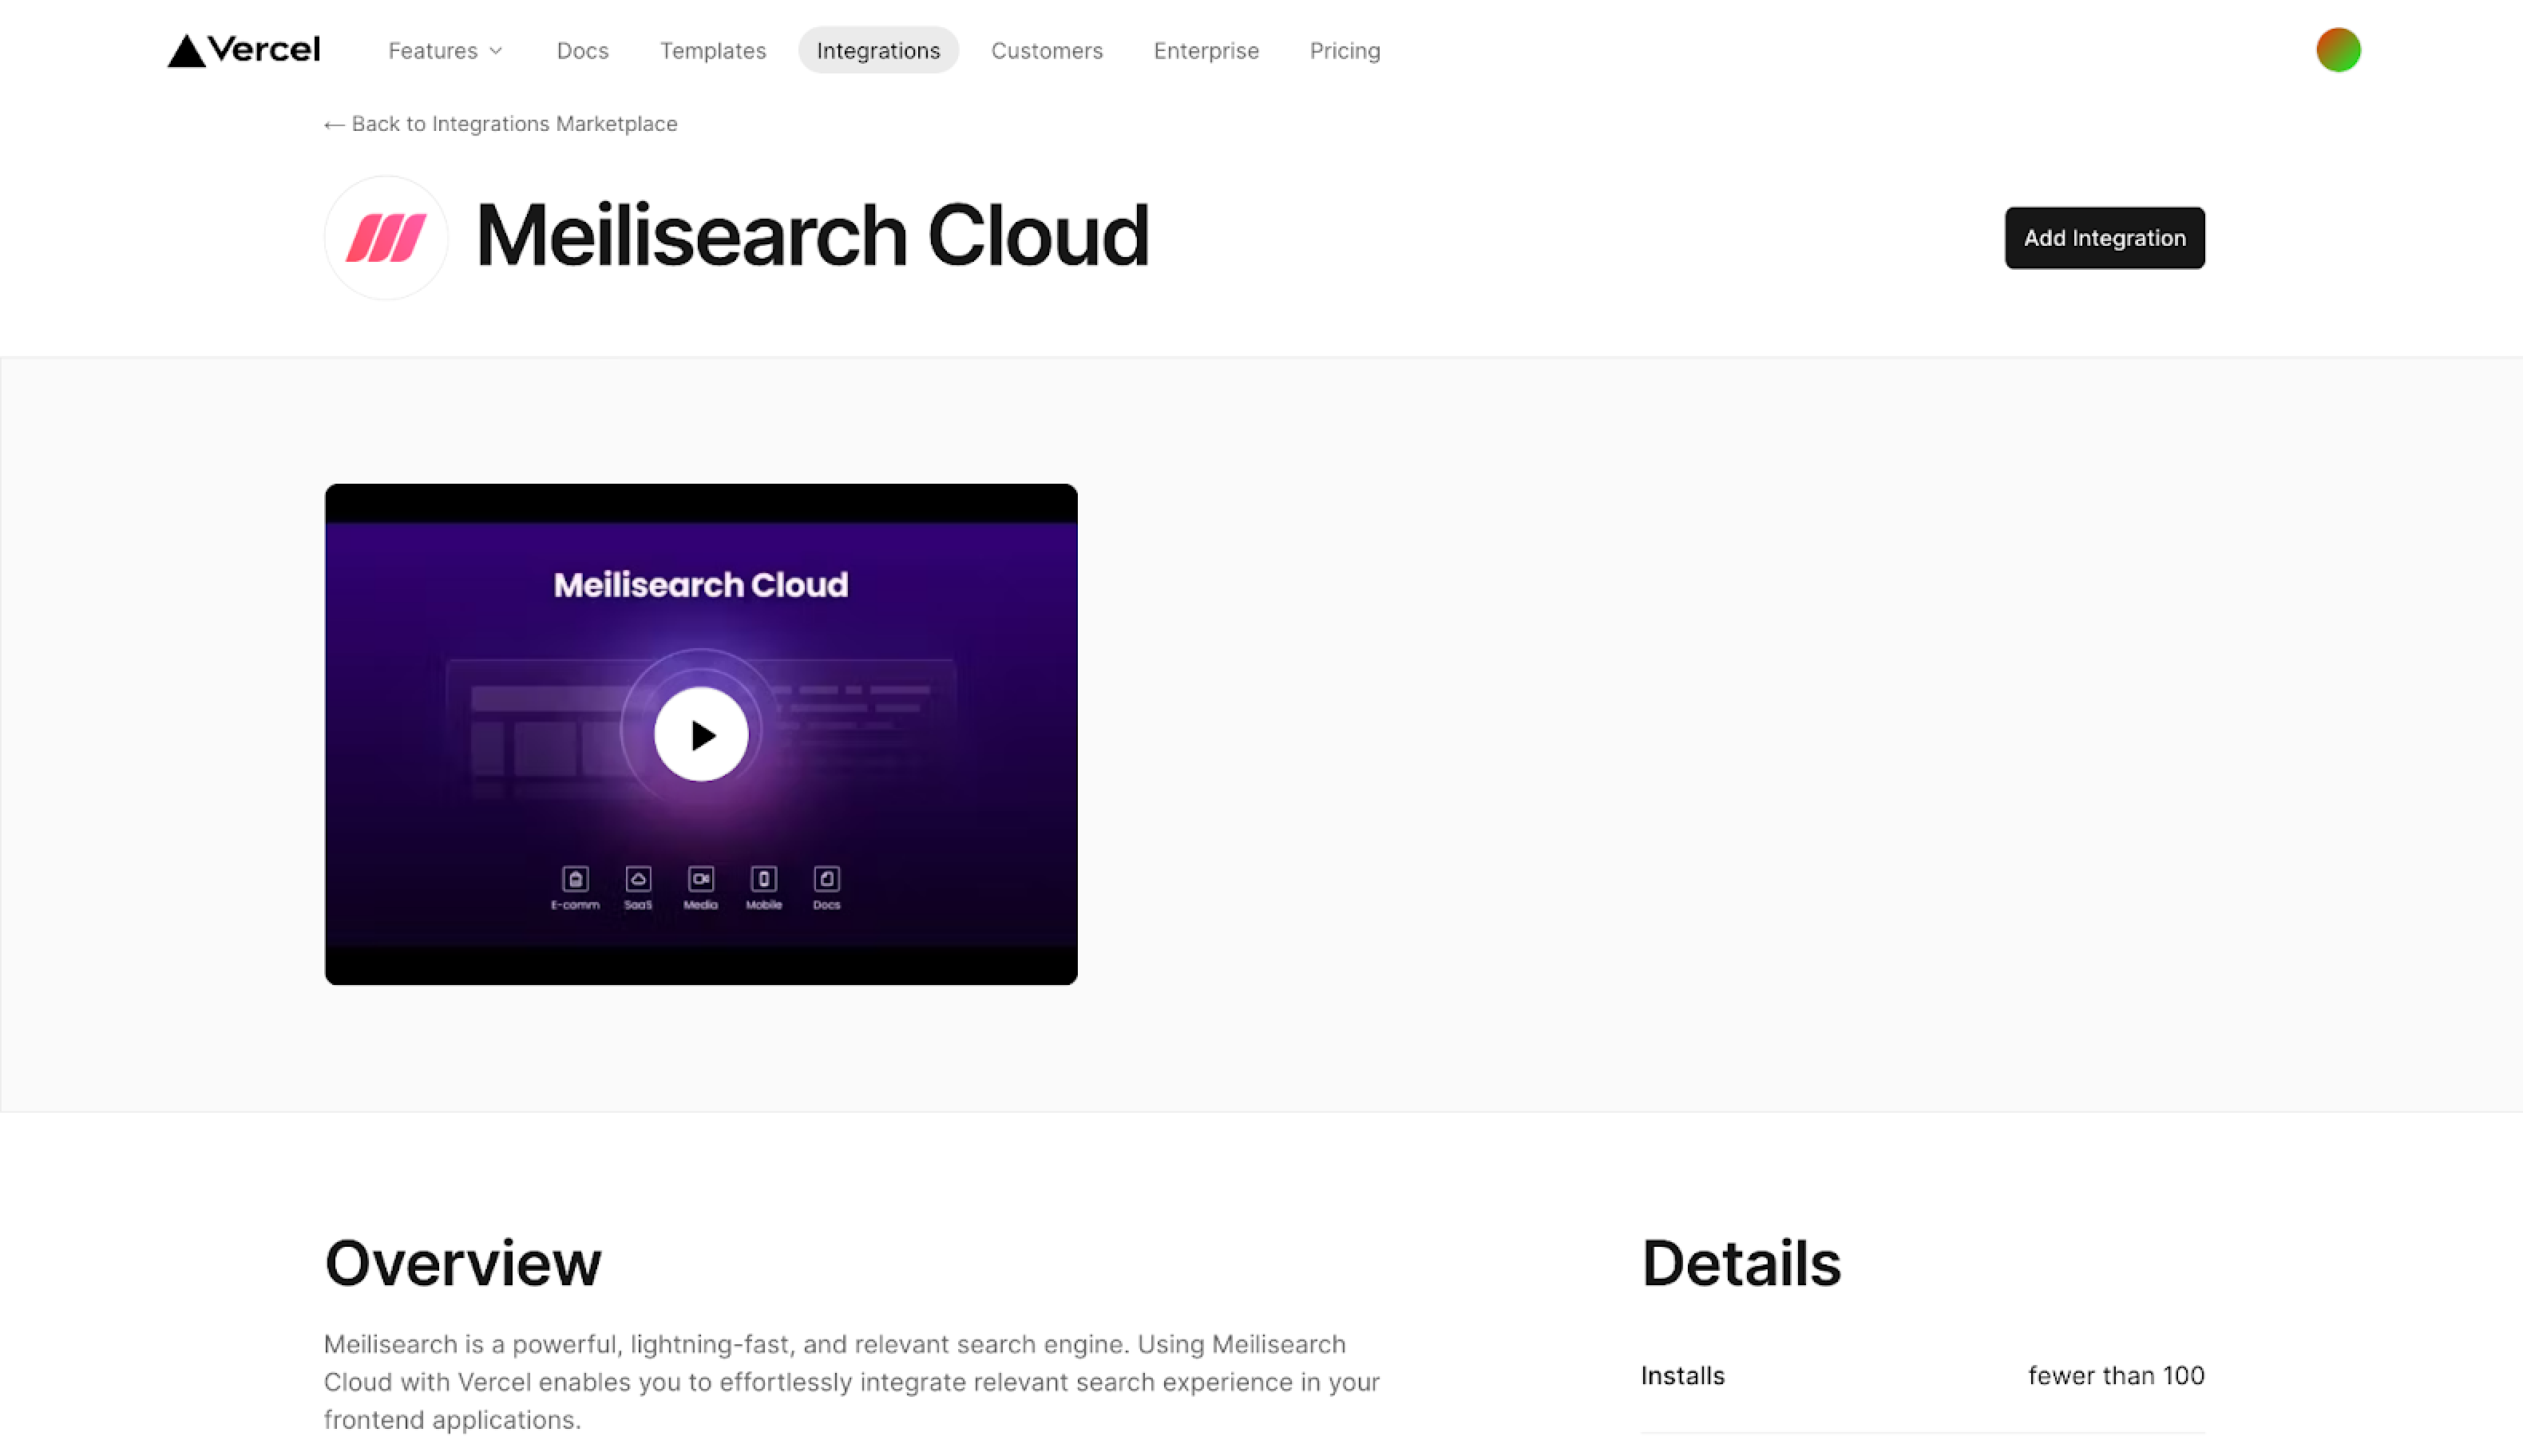 Meilisearch integration page in Vercel's marketplace